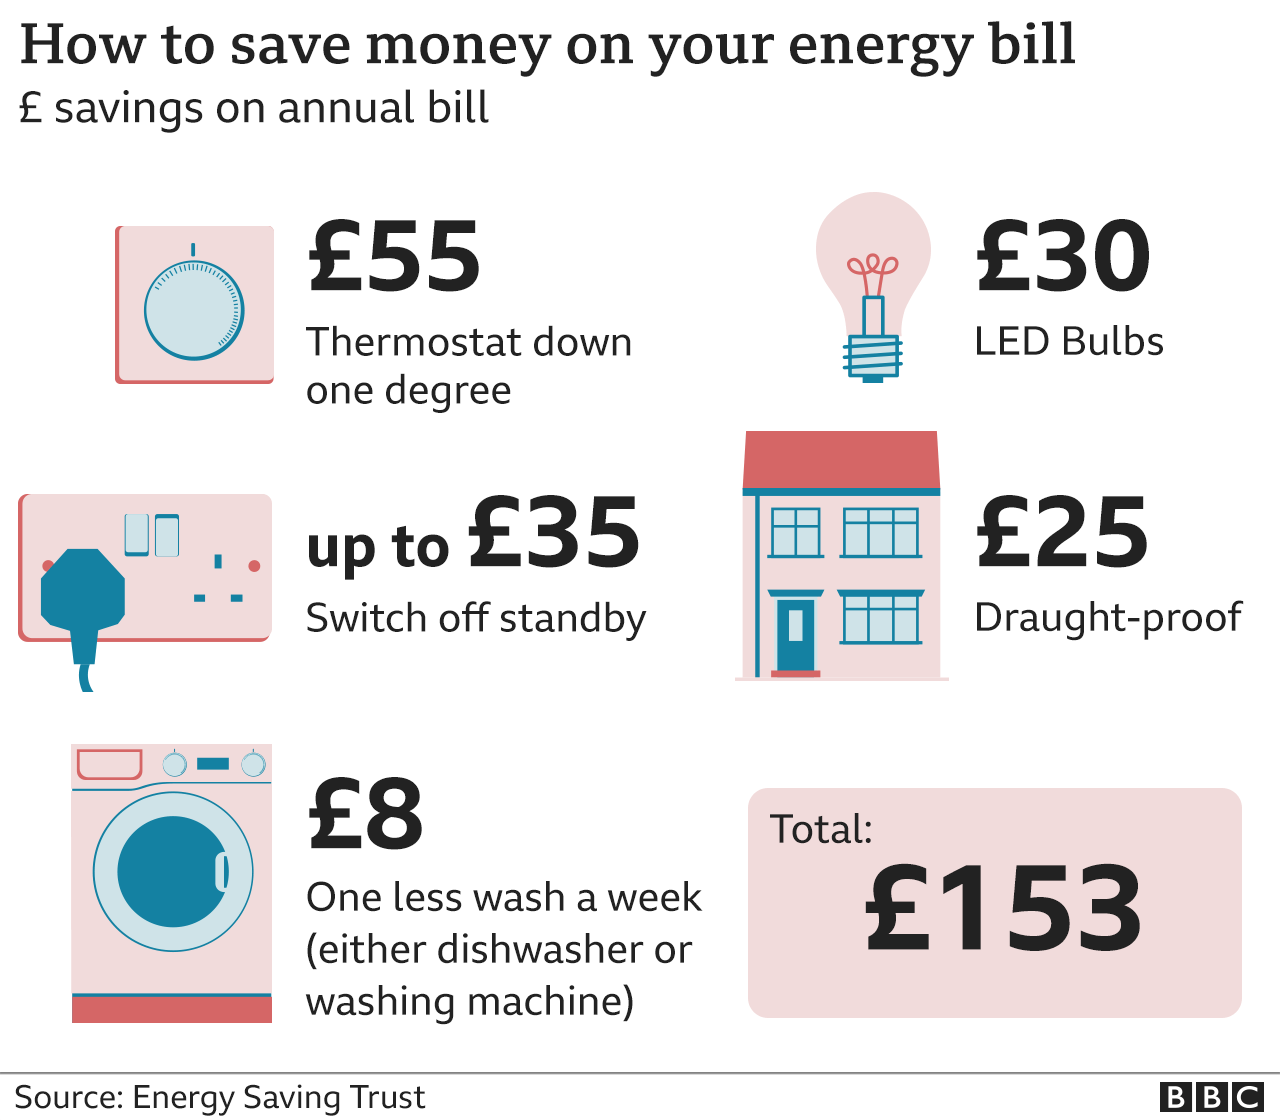 How to save money on your energy bills graphic